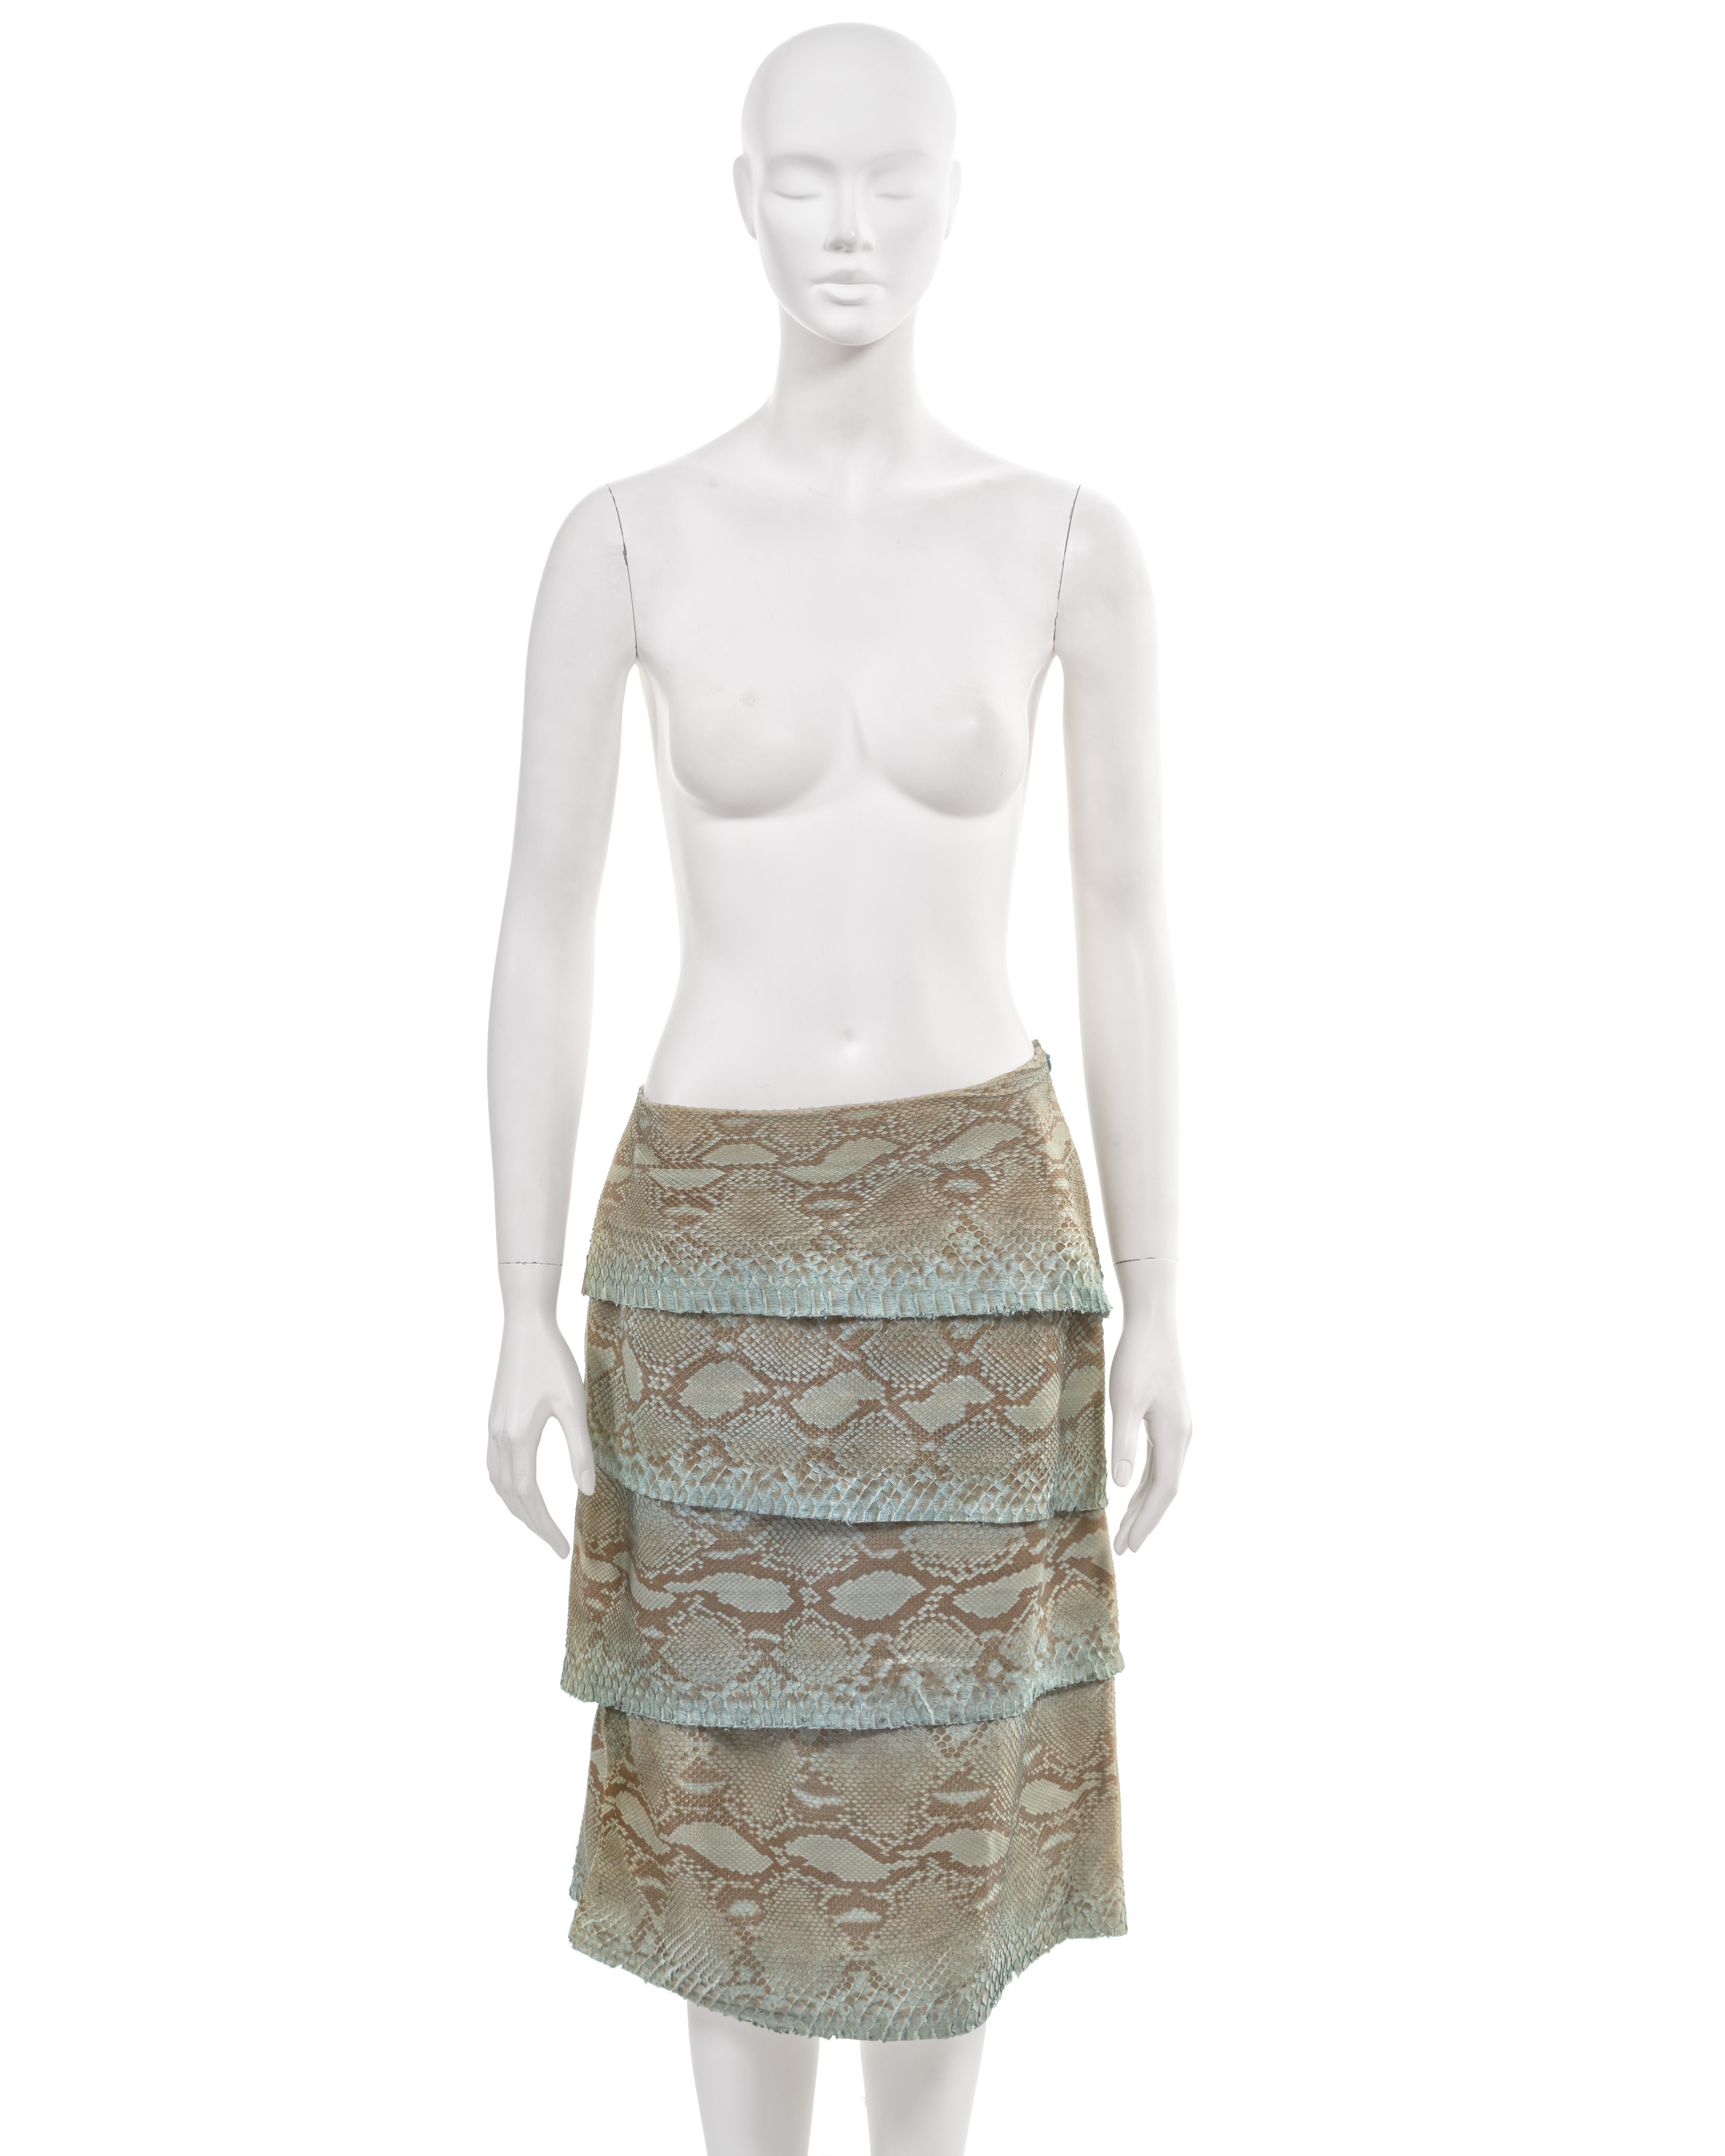 ▪ Gianni Versace knee-length leather skirt 
▪ Creative Director: Donatella Versace
▪ Fall-Winter 1999
▪ Sold by One of a Kind Archive 
▪ Expertly crafted from four tiers of dyed turquoise python skins
▪ Asymmetric waist and hemline 
▪ Hanging drape